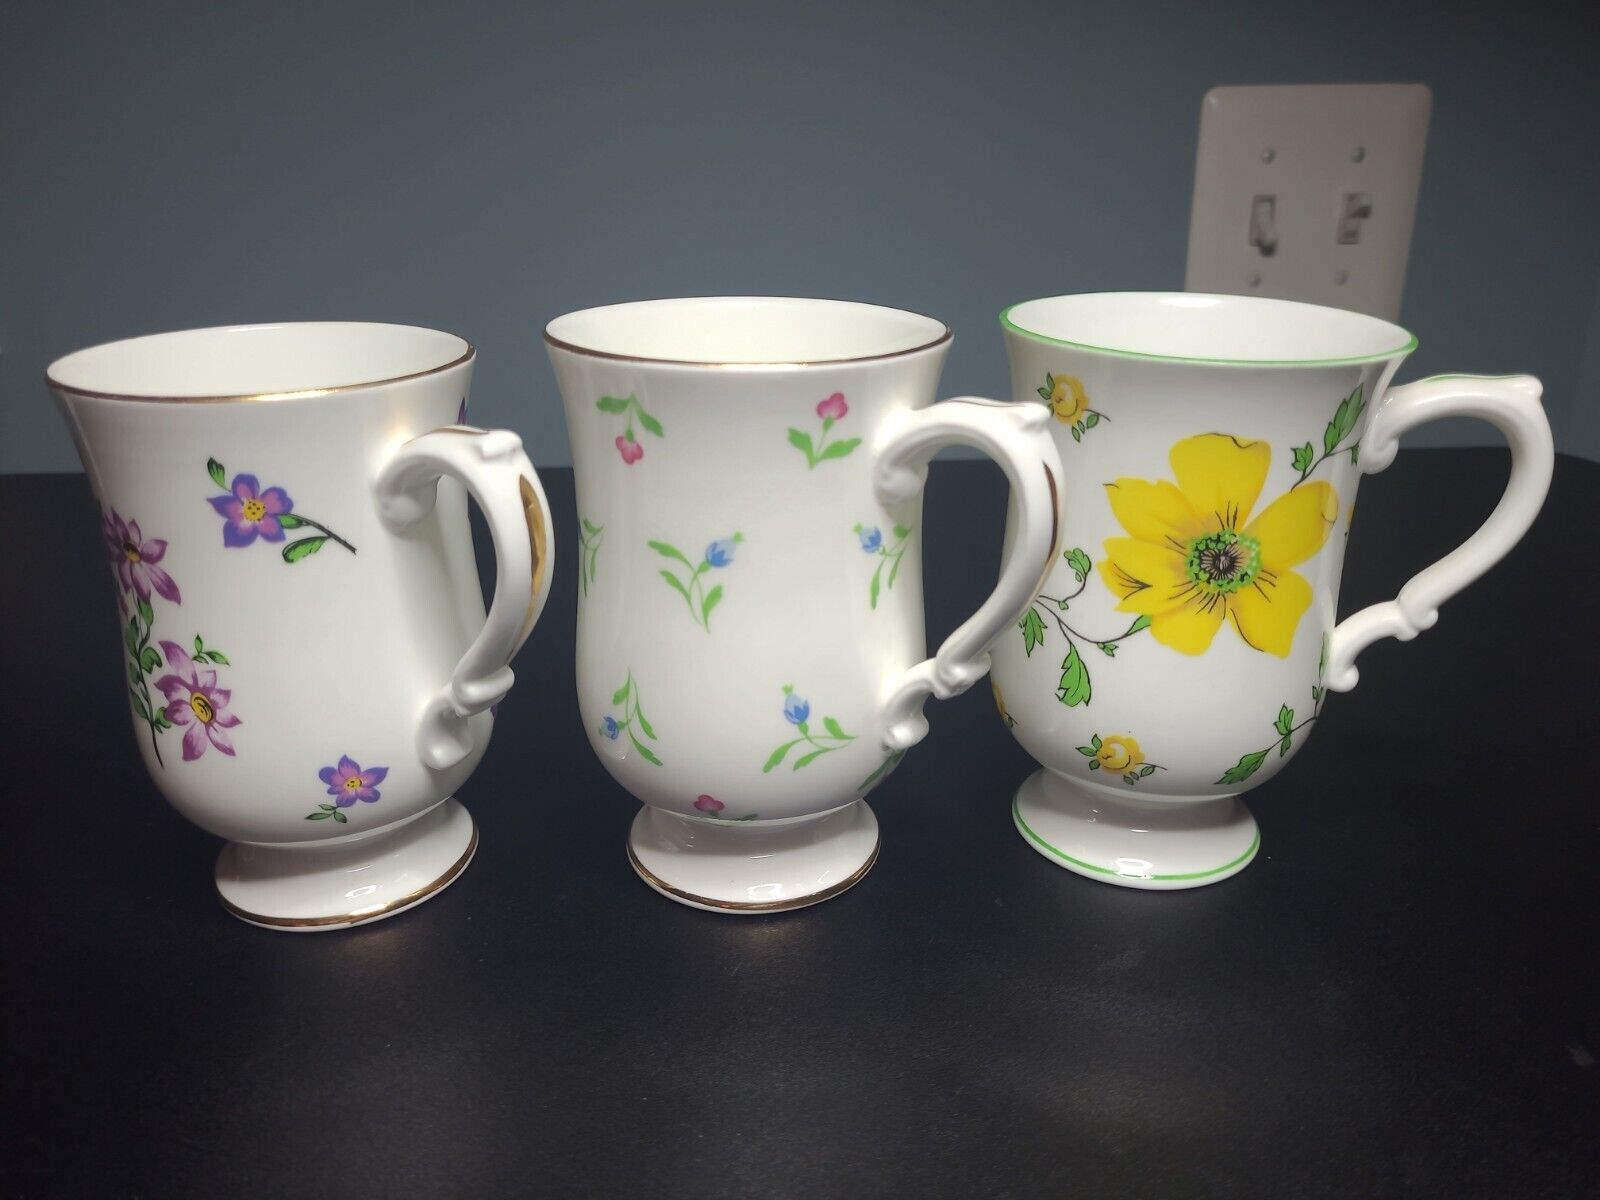 3 Royal Victoria Fine Bone China England Footed Mugs/Cups Floral Gold Trim